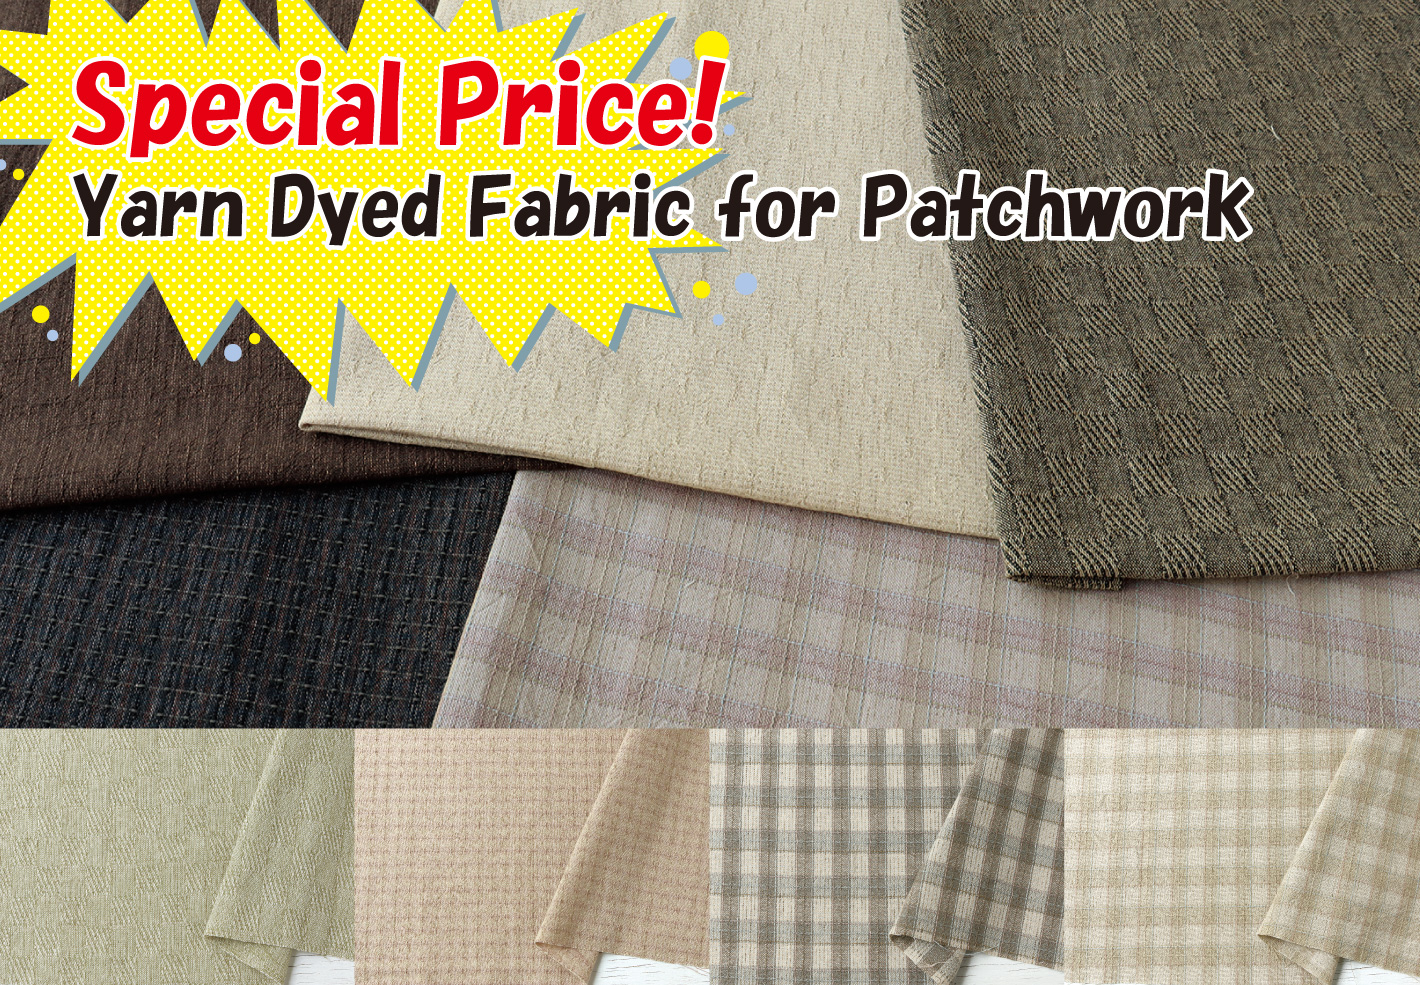 Arcadian check-Patchwork Yarn Dye Fabric Special Price